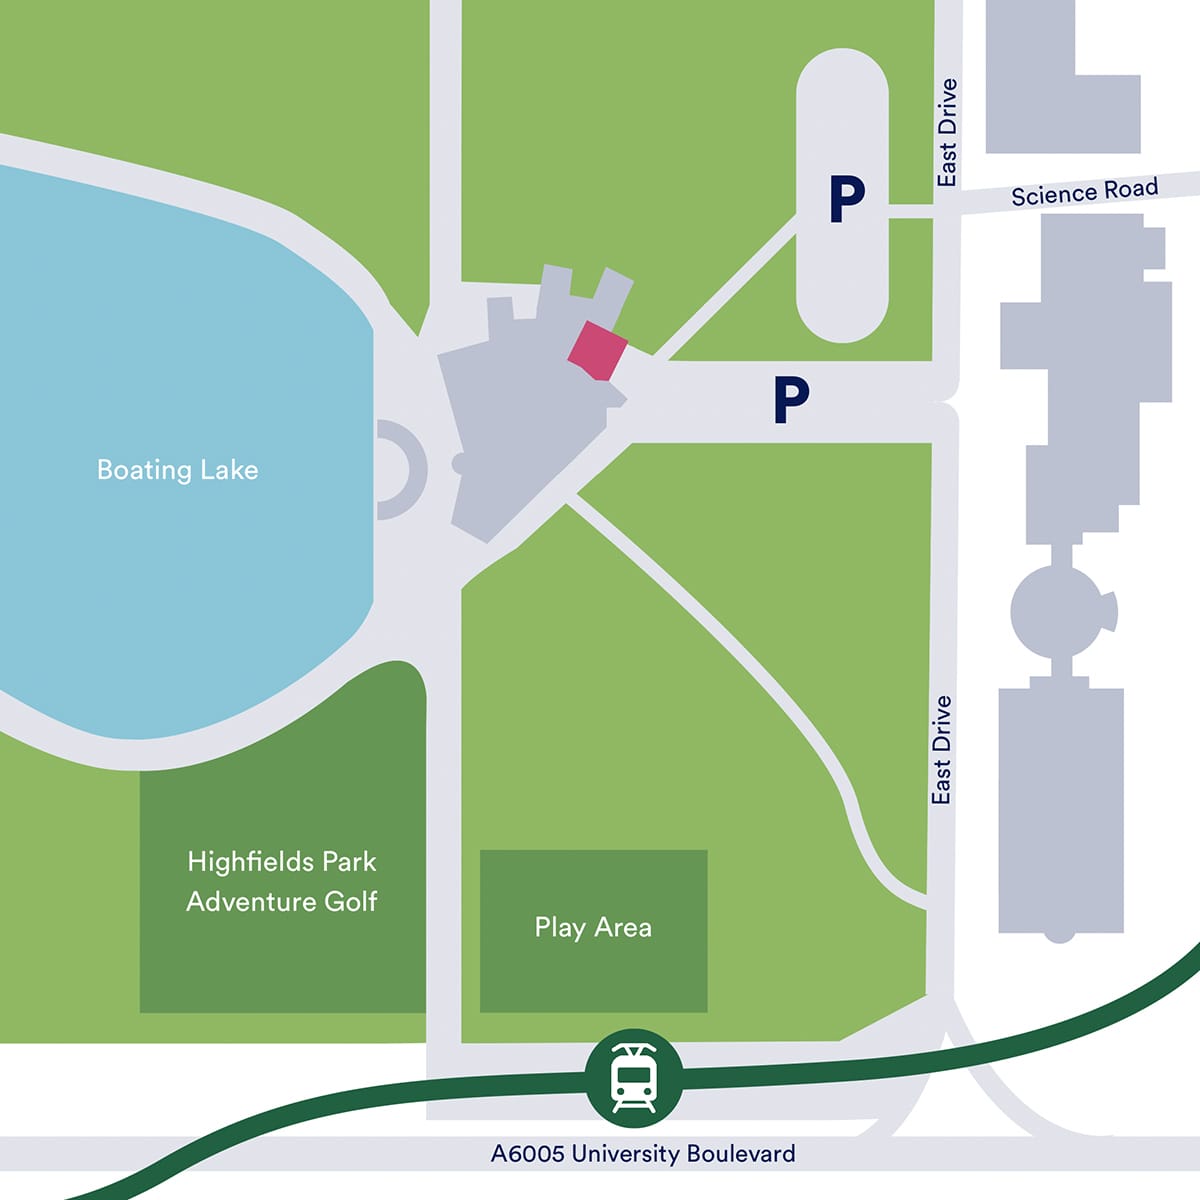 A map showing where the Performing Arts Studio is located in relation to Lakeside Arts' buildings and the surrounding parkland.